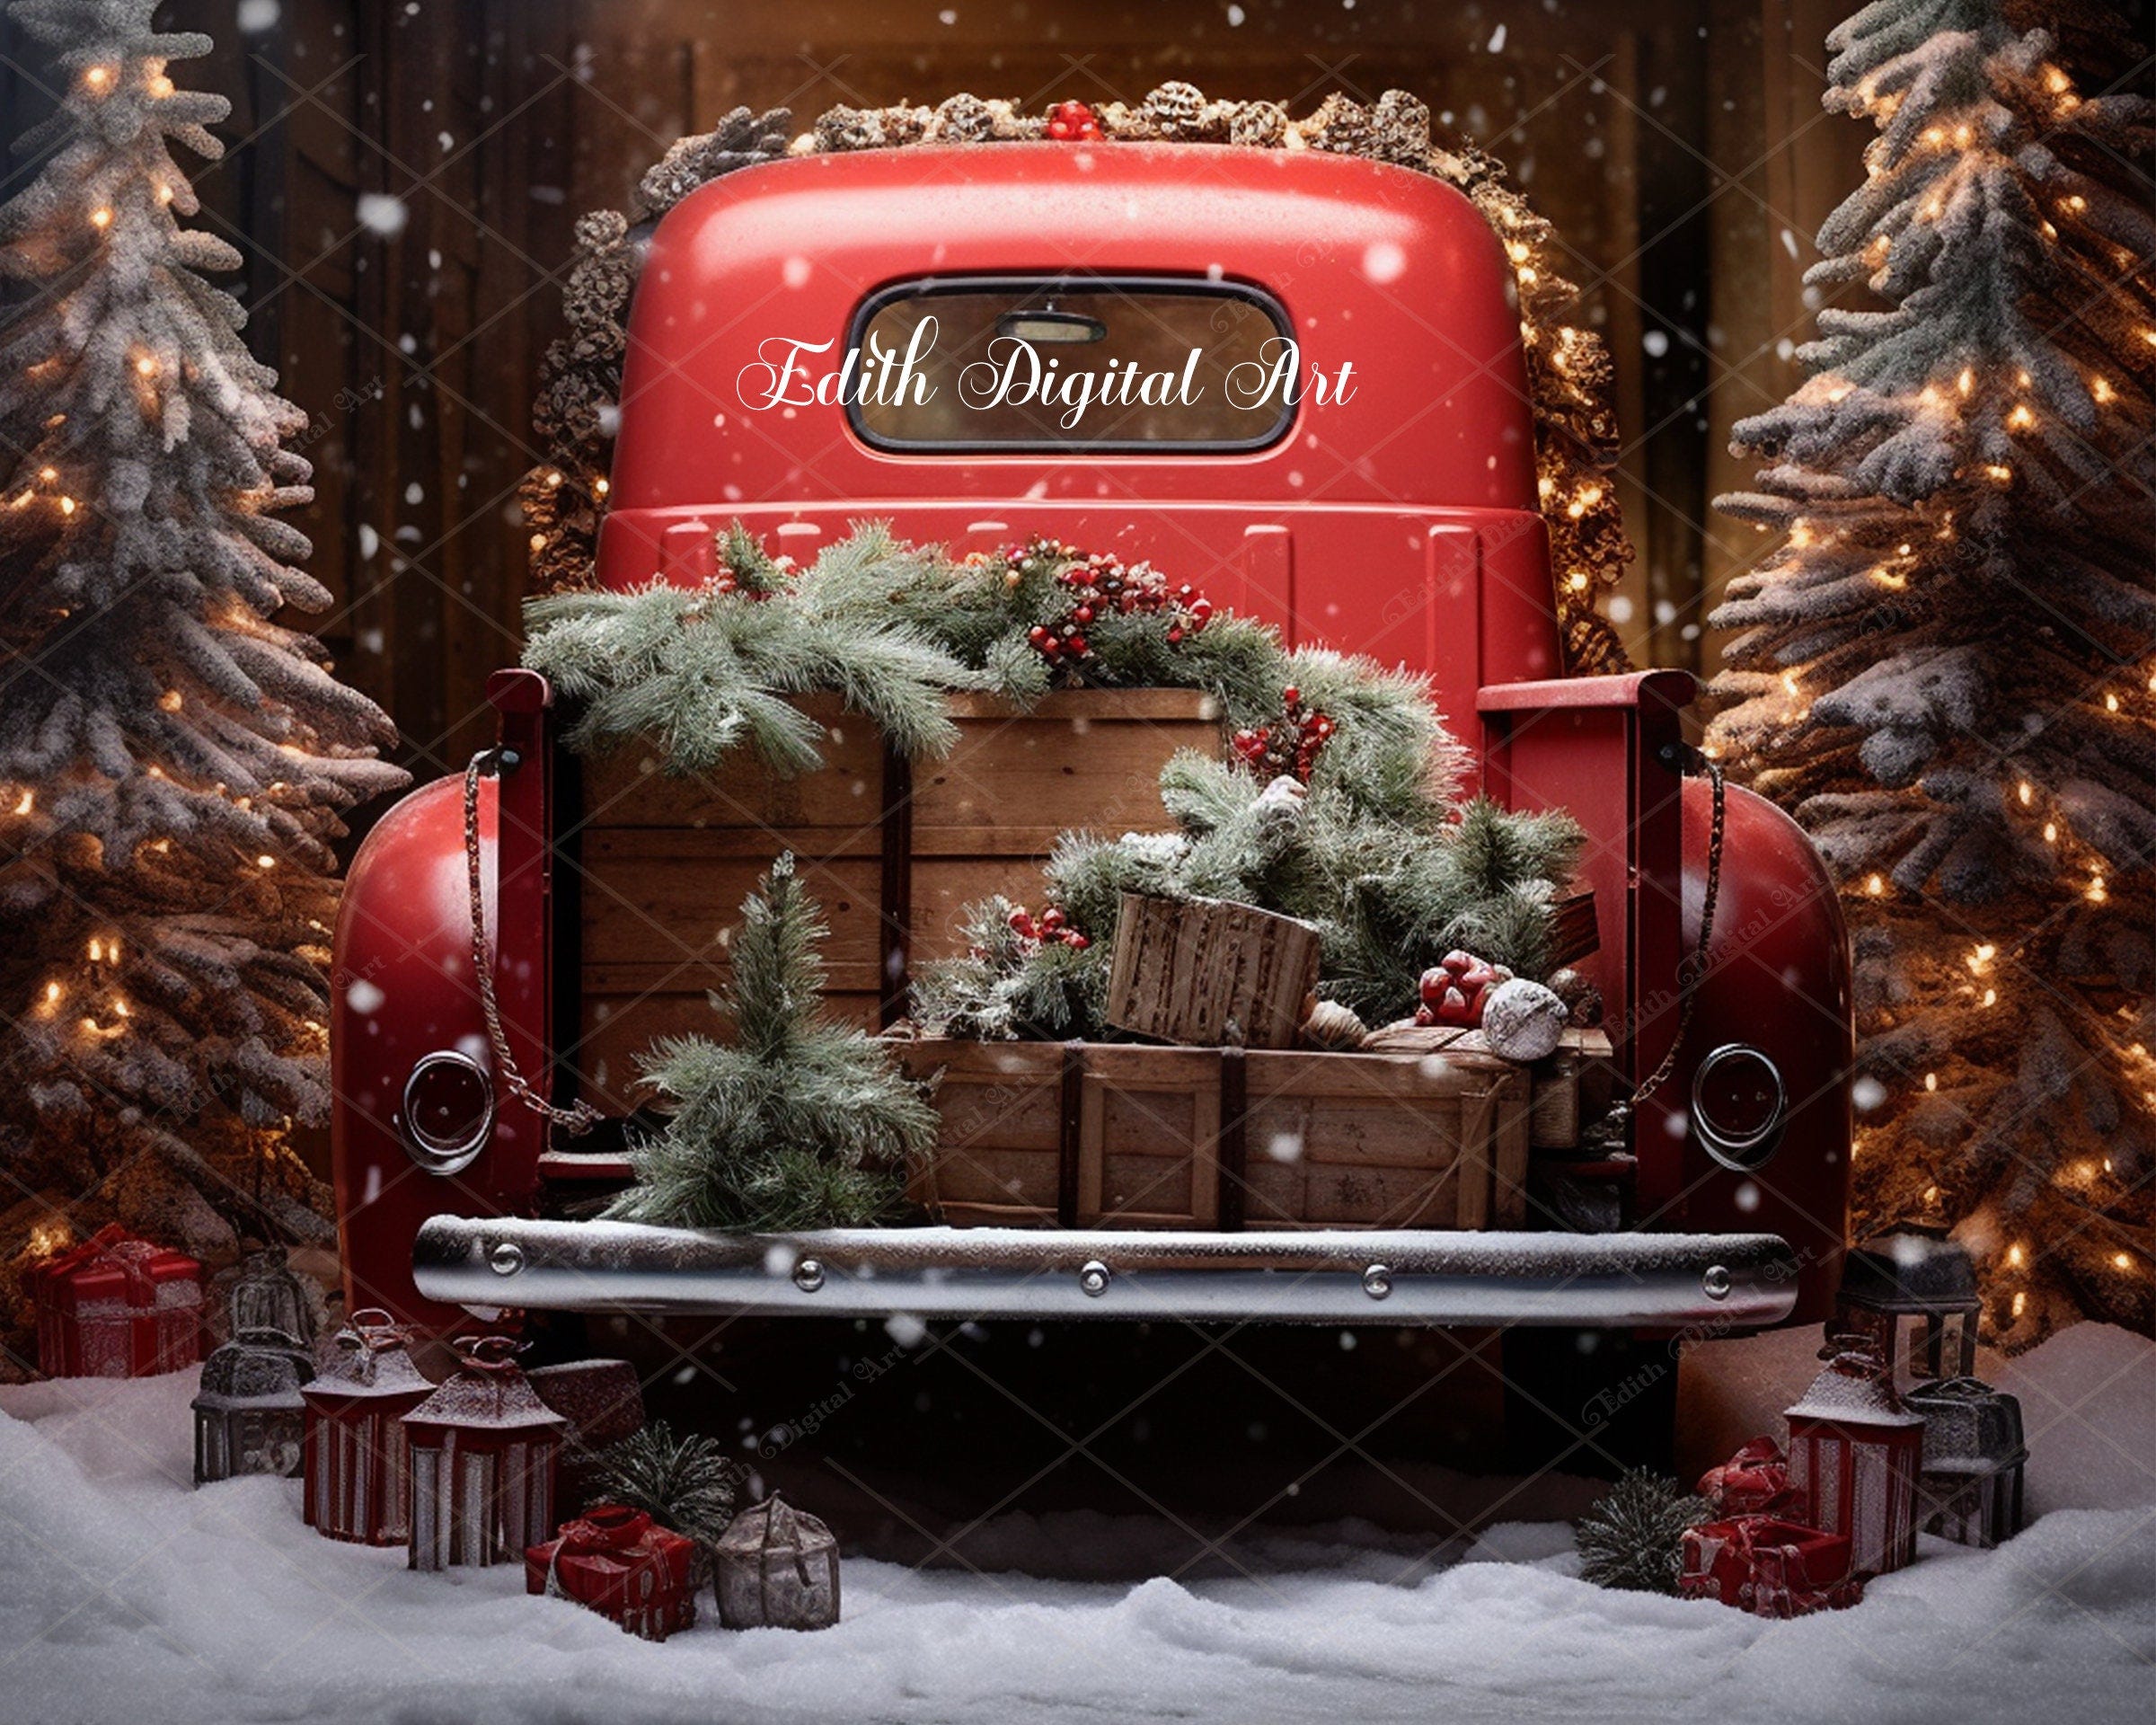 Christmas Red Truck Backdrop Digital Background Photography Composite for Christmas Outdoor Portrait of Family, Kids, Pets, Vintage Overlay.